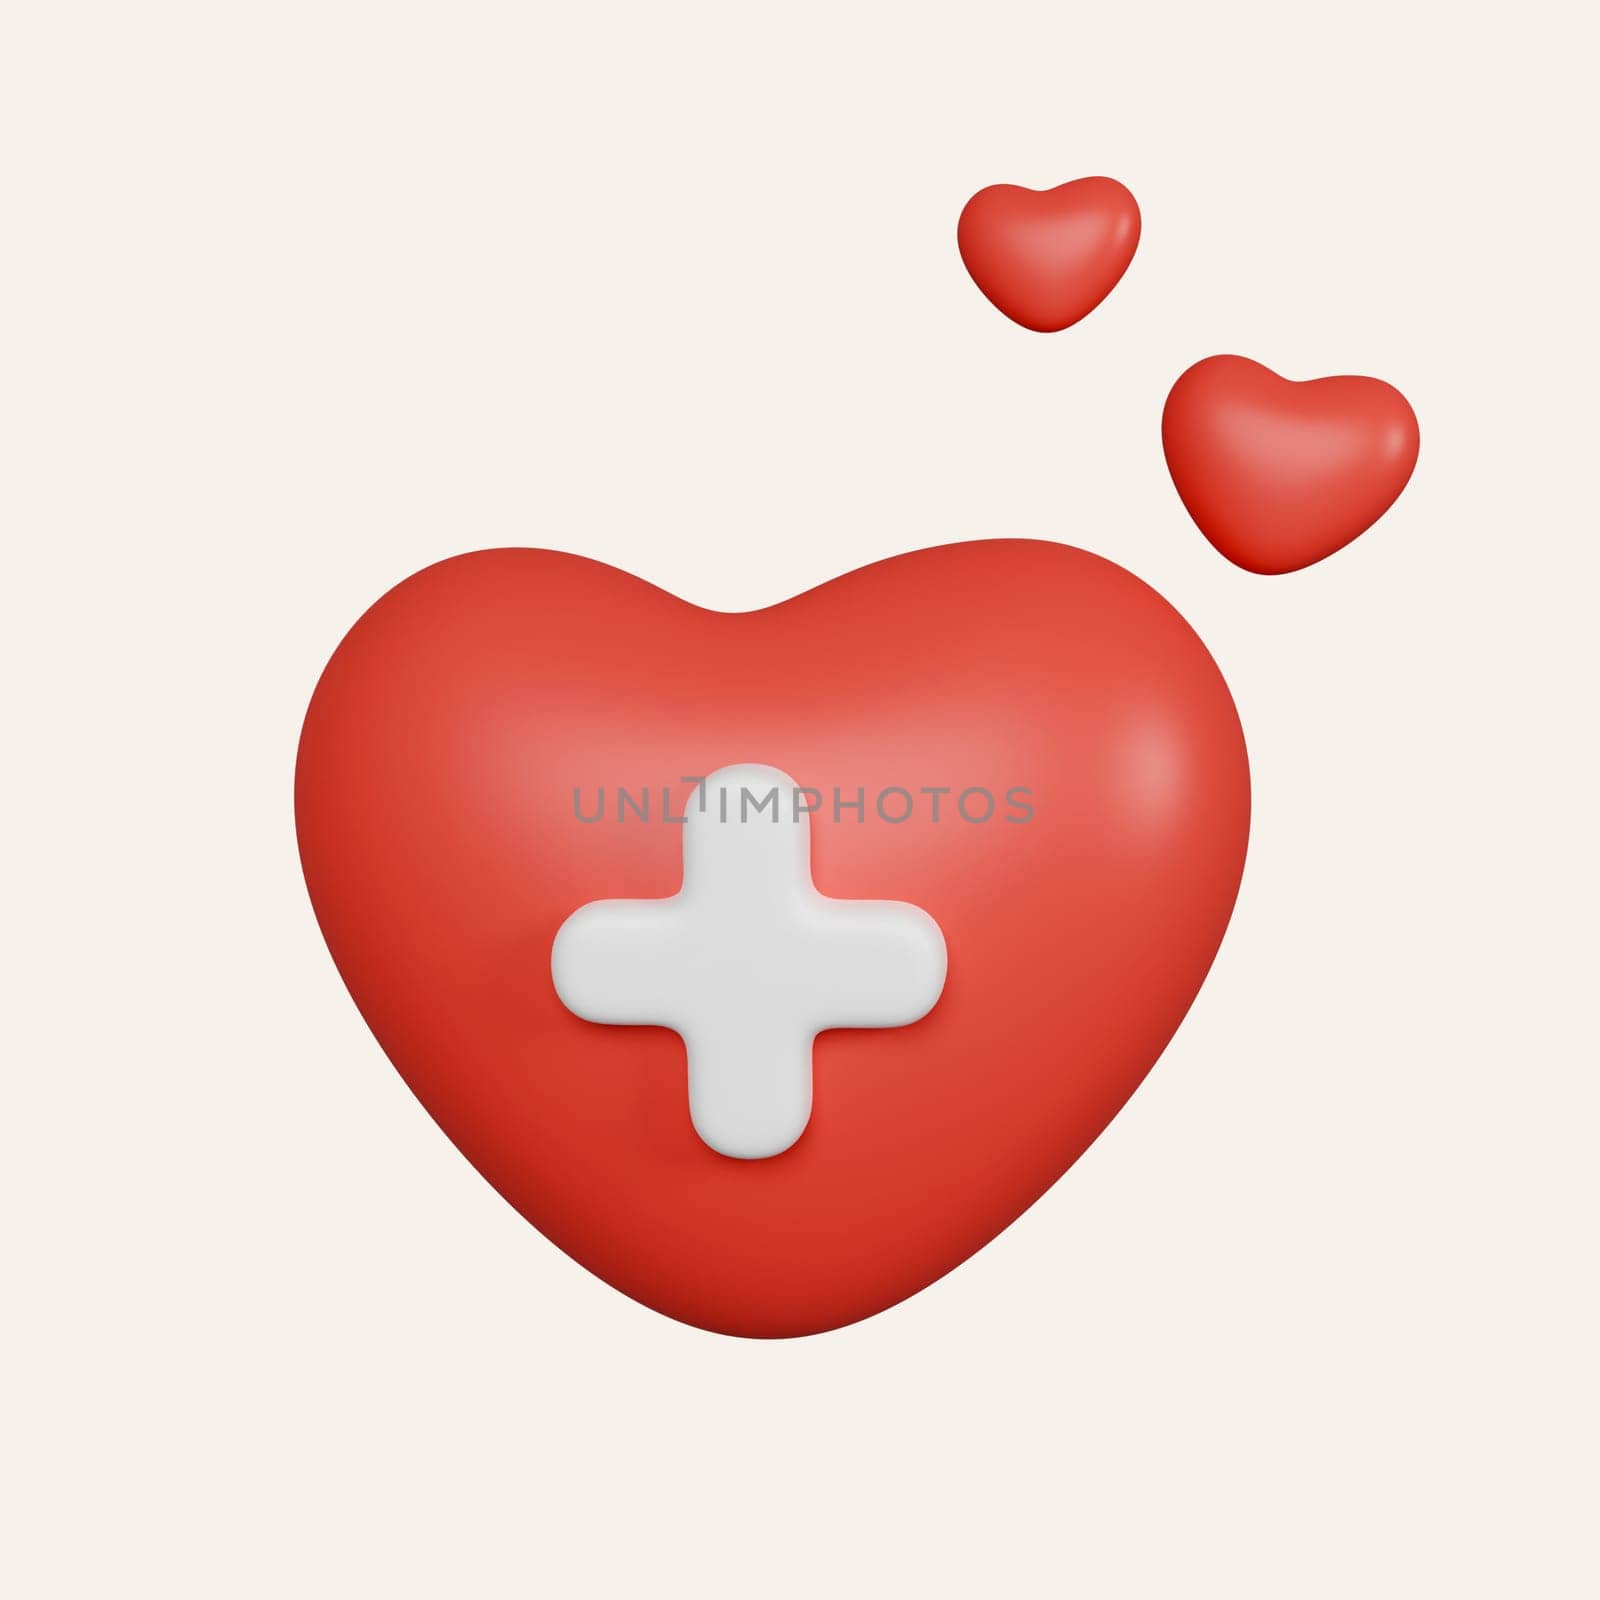 3d red heart with plus sign icon. heartbeat or cardiogram for healthy lifestyle, pulse beat measure, cardiac assistance. icon isolated on white background. 3d rendering illustration. Clipping path. by meepiangraphic